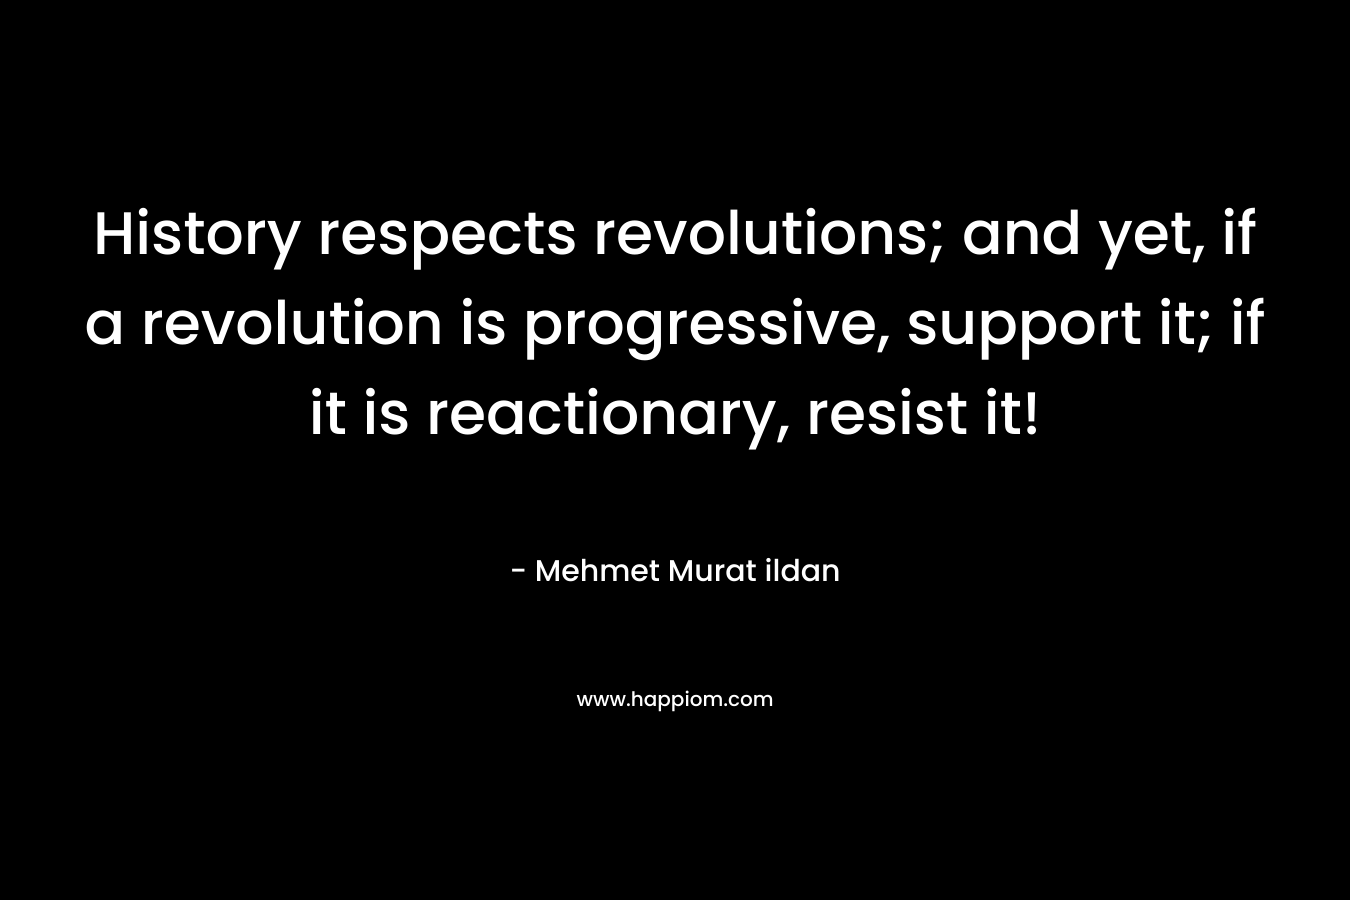 History respects revolutions; and yet, if a revolution is progressive, support it; if it is reactionary, resist it!